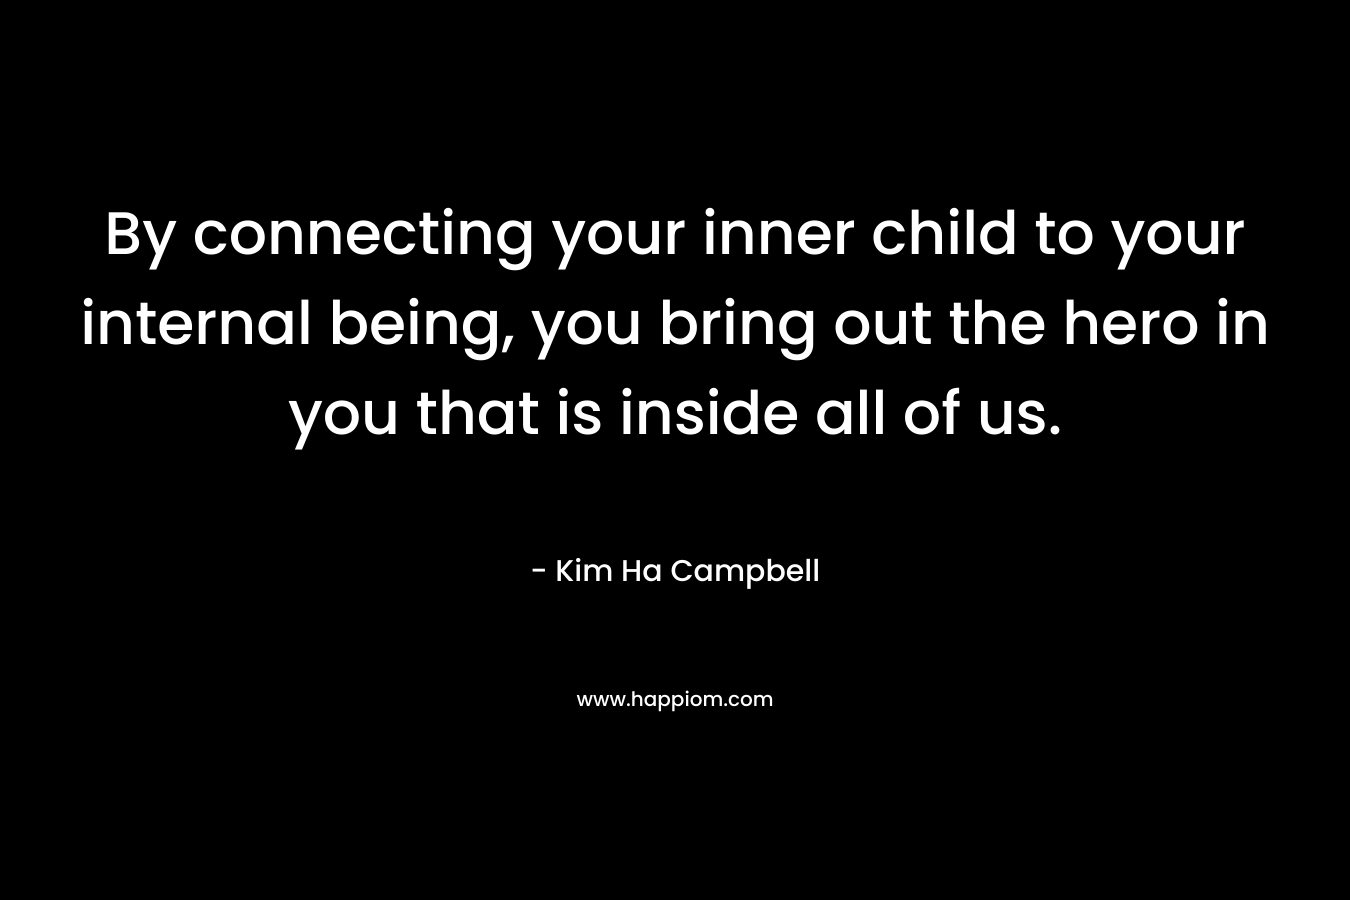 By connecting your inner child to your internal being, you bring out the hero in you that is inside all of us.